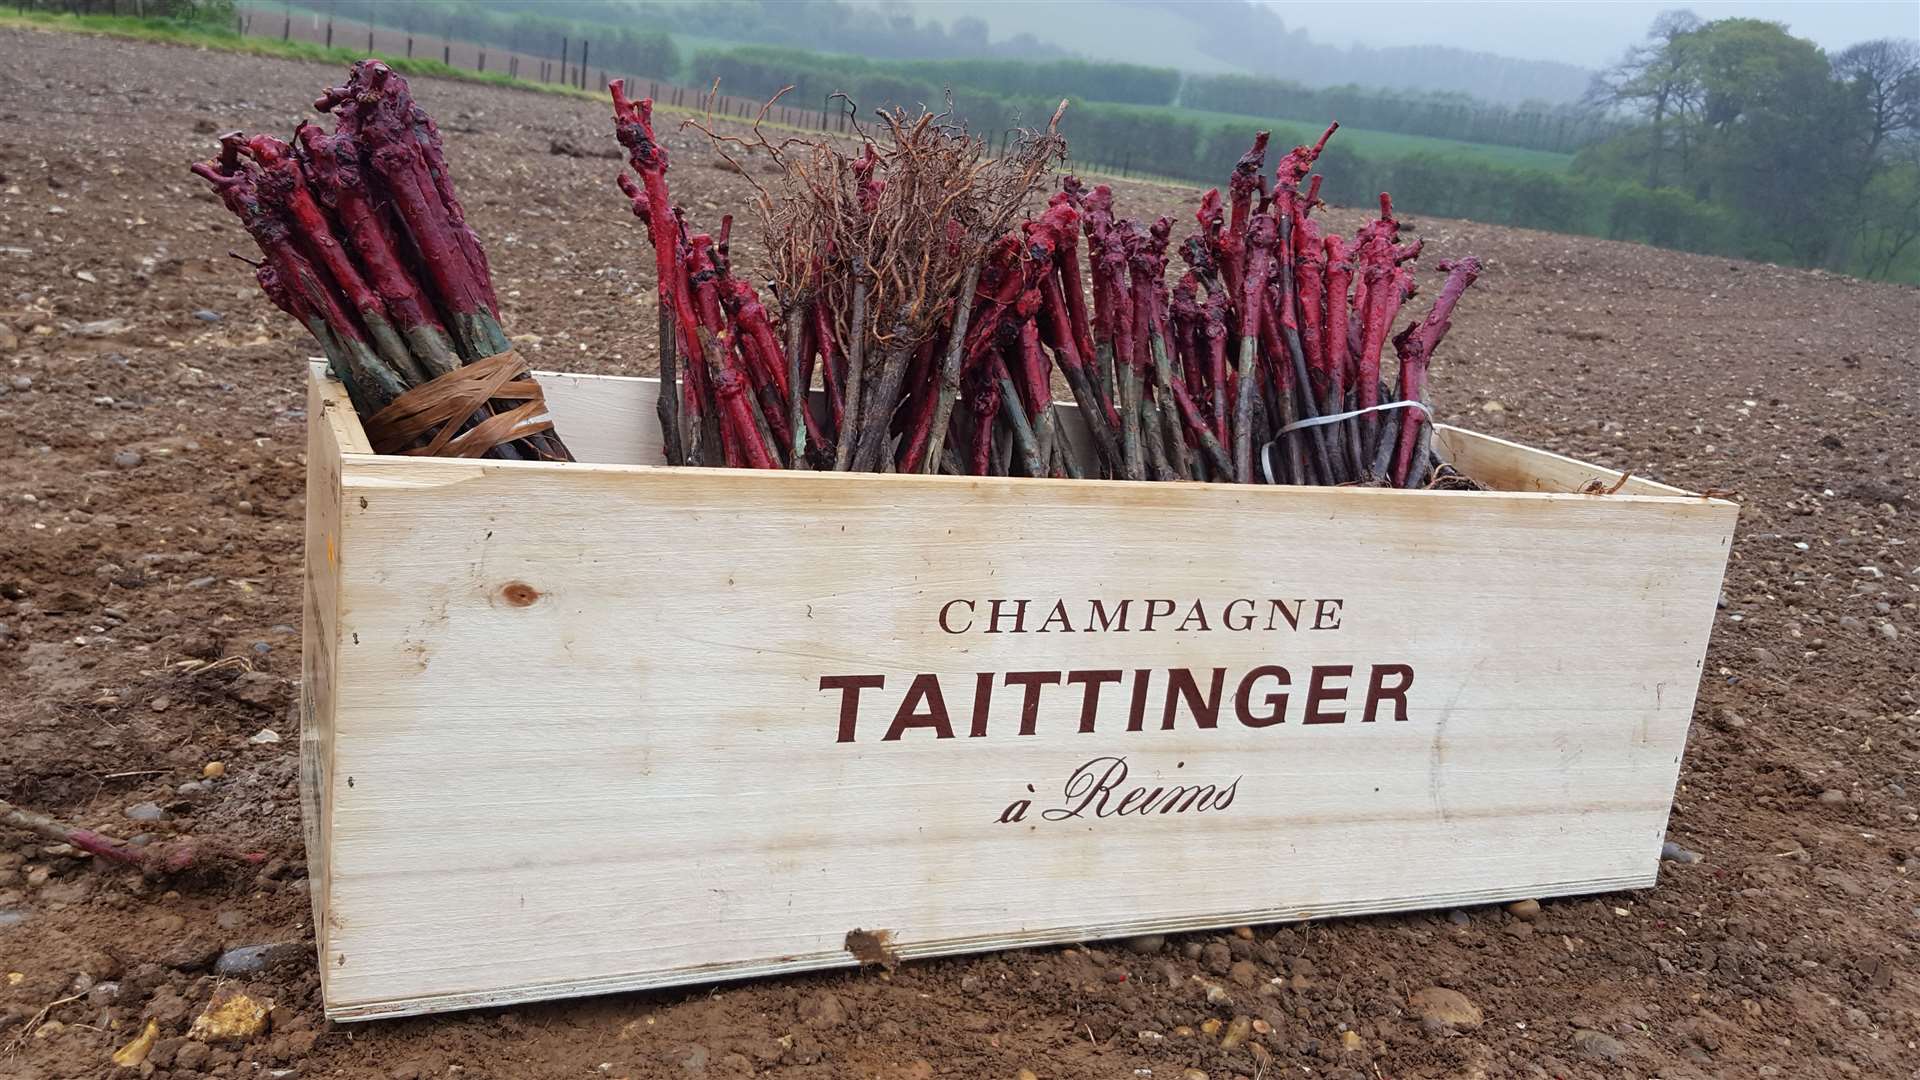 Taittinger planted its first vines in Kent in Chilham